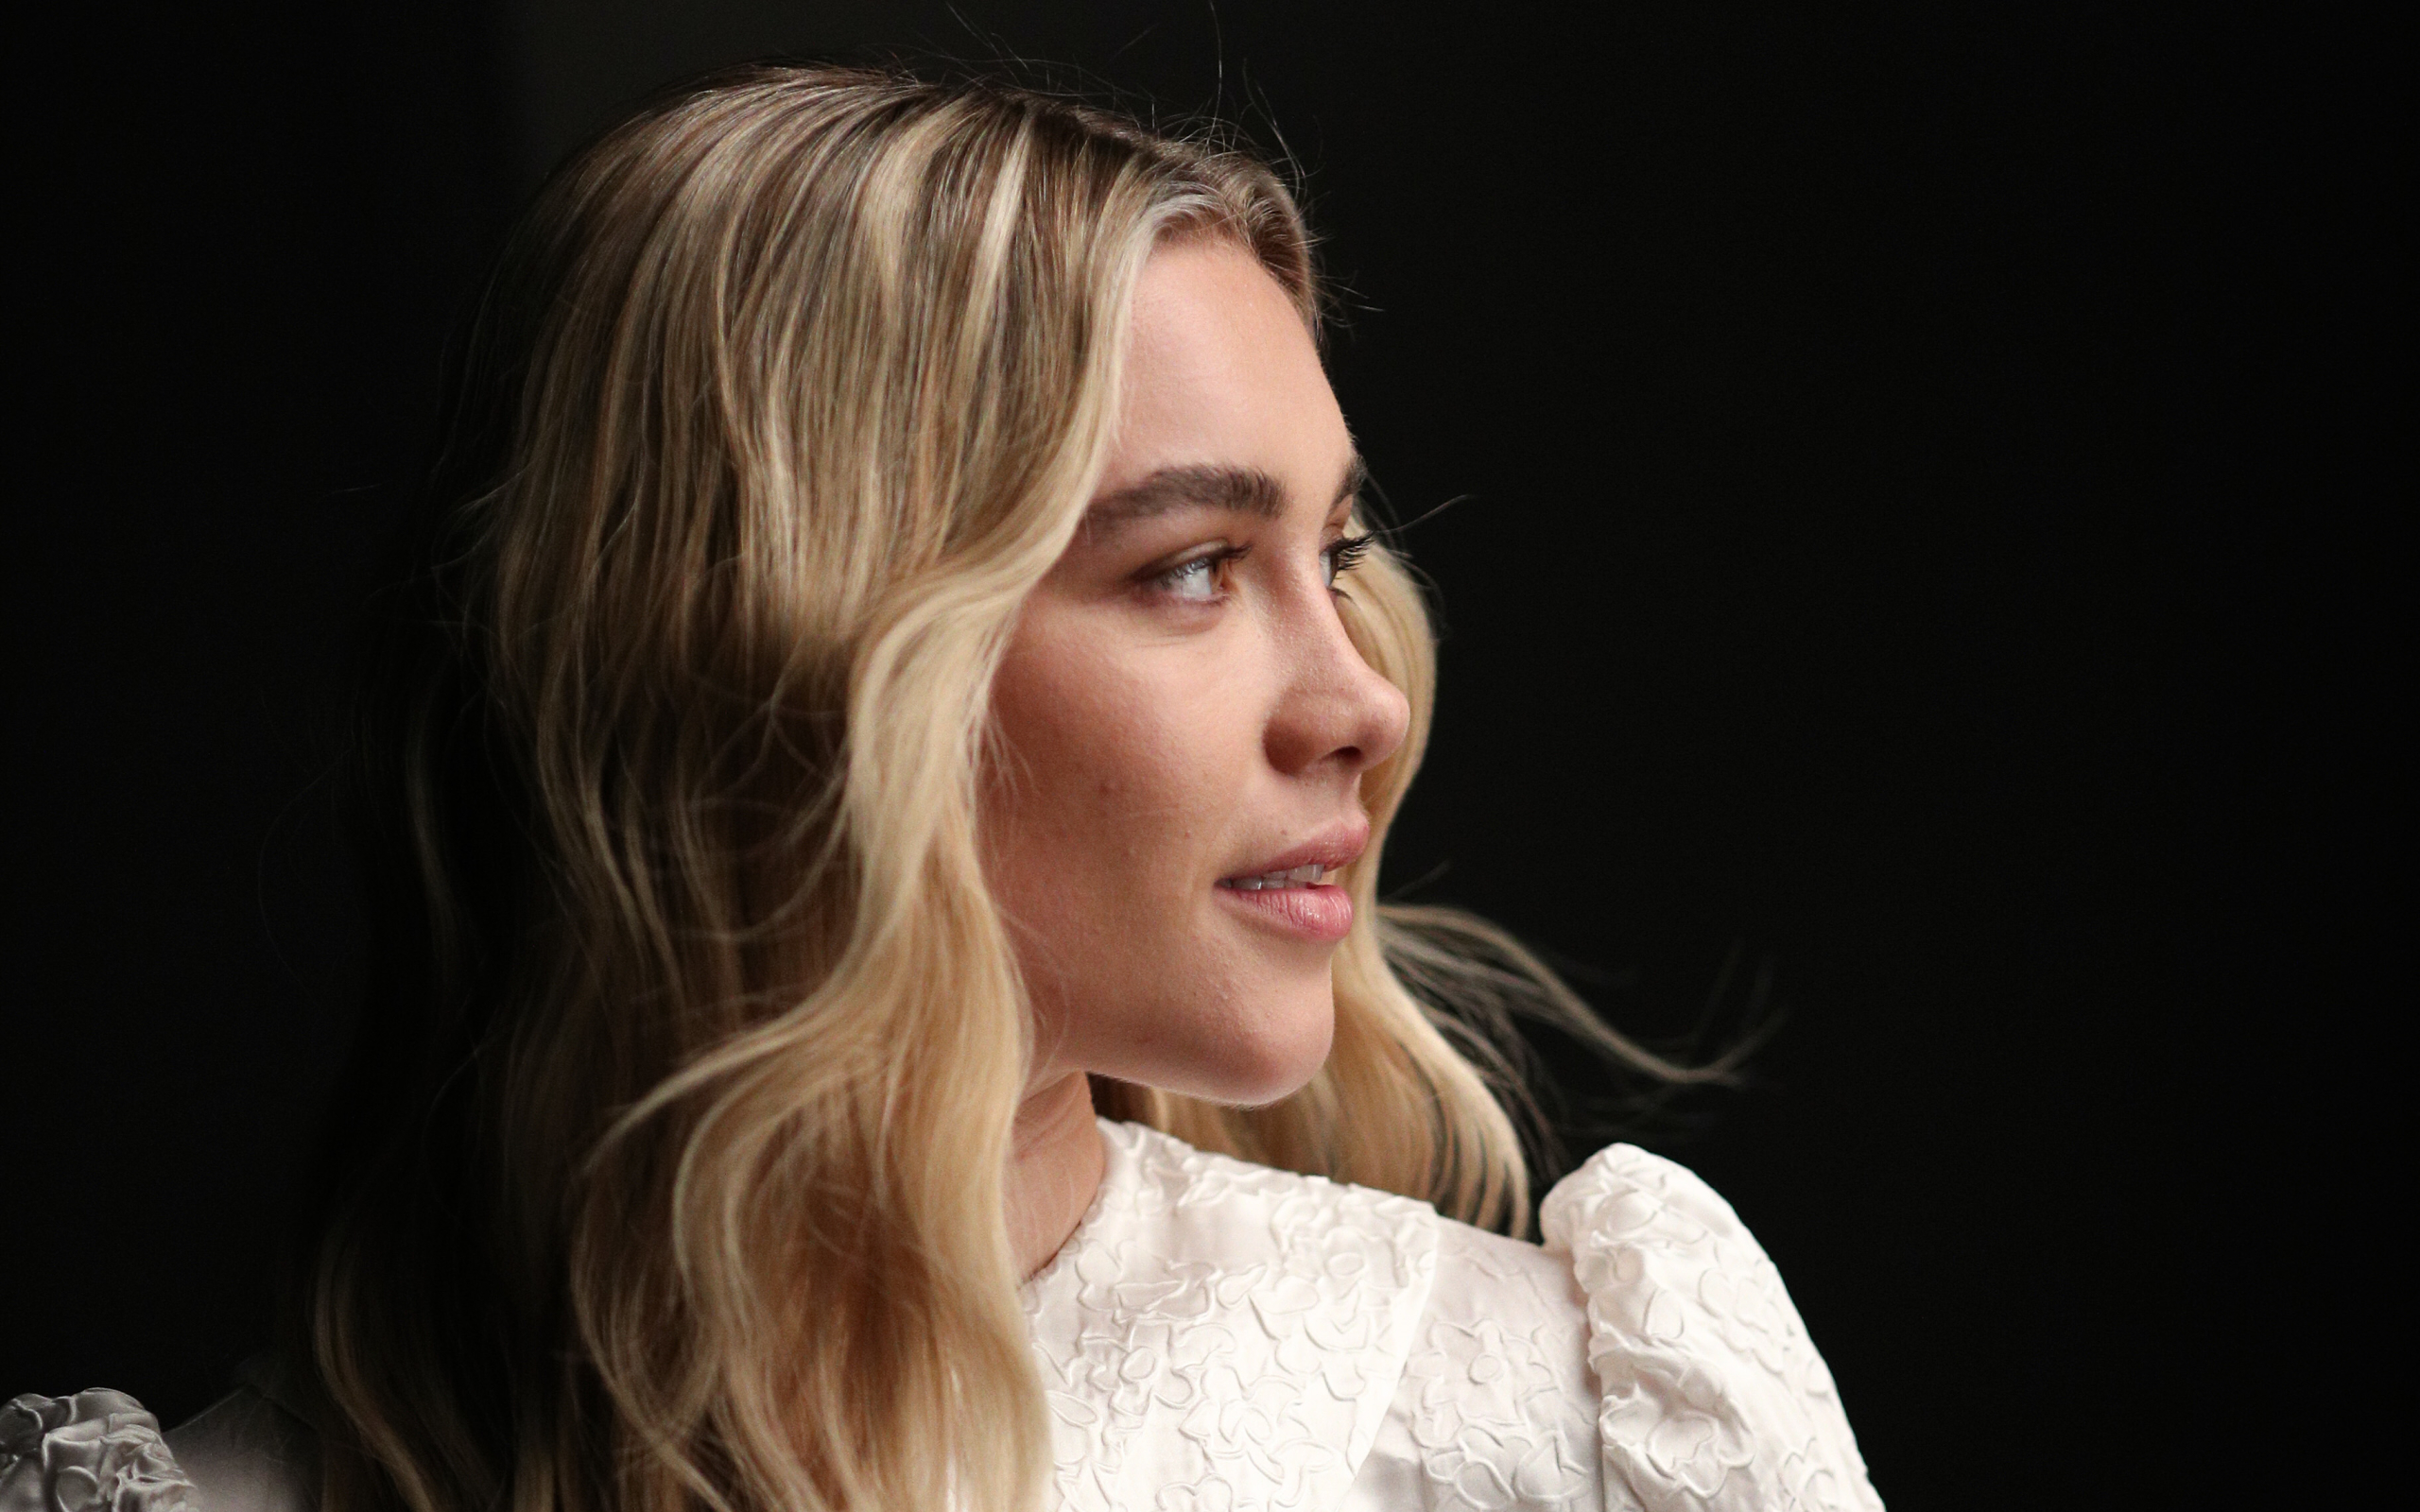 New Florence Pugh 5K 2020 Wallpapers